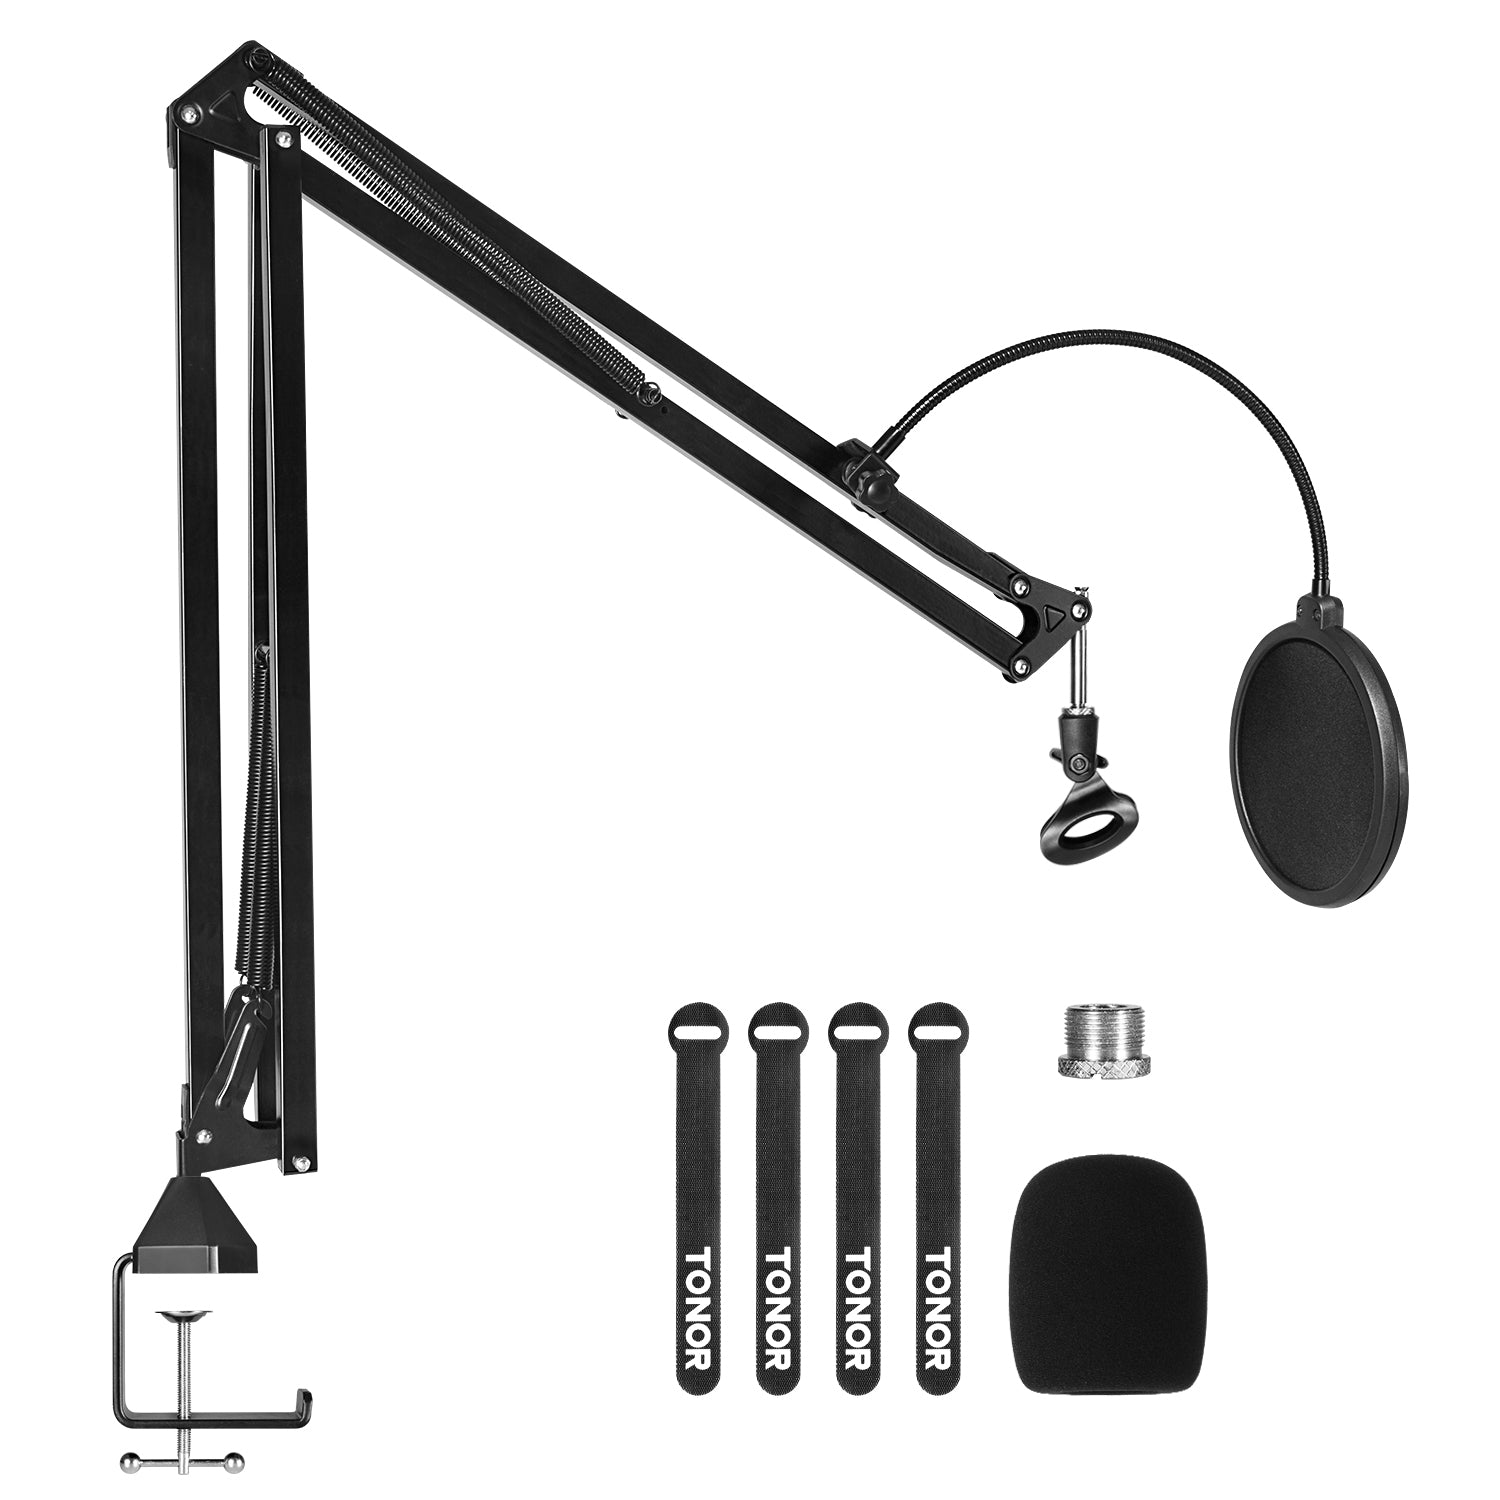 InnoGear Microphone Arm Stand, Heavy Duty Mic Arm Microphone Stand  Suspension Scissor Boom Stands with Mic Clip and Cable Ties for Blue Yeti  Snowball